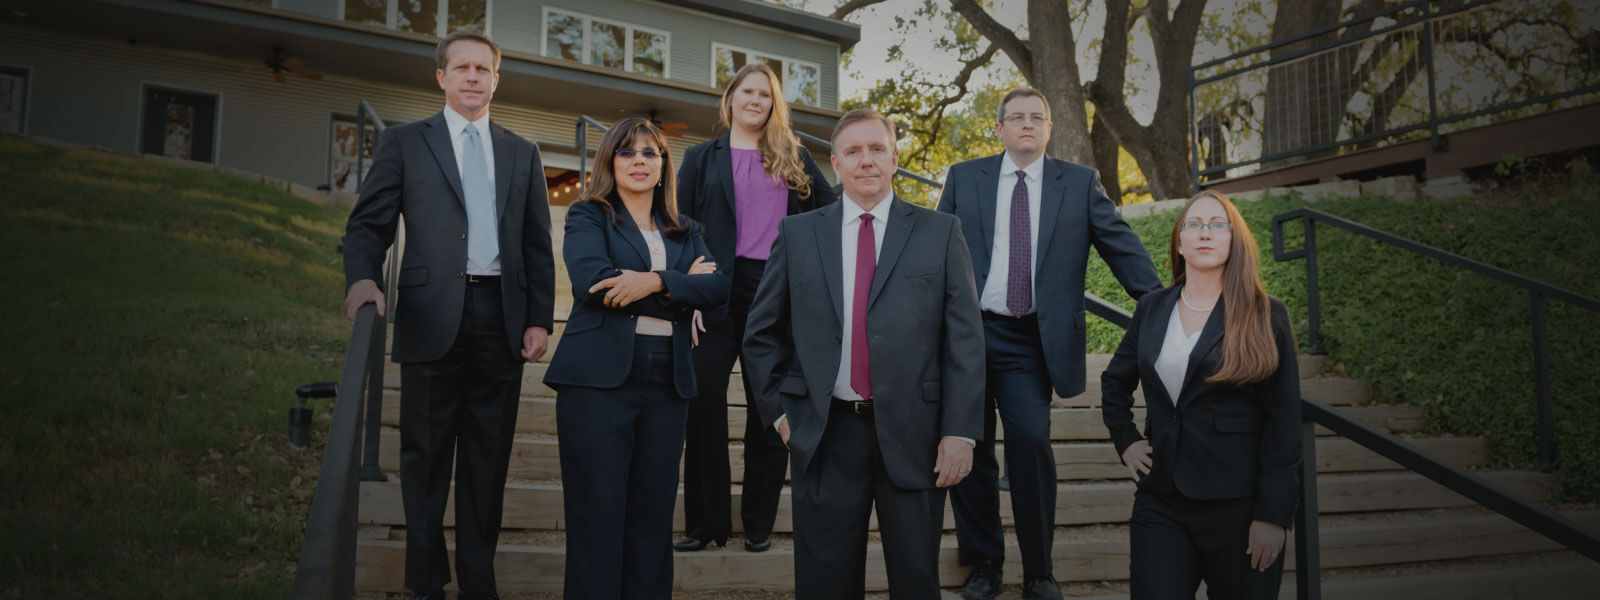 The Carlson Law Firm Is A National Personal Injury Law Firm Dedicated To Defending Those Injured In Auto Accidents, Dangerous Drugs, Defective Products, Motorcycle Crashes And More.